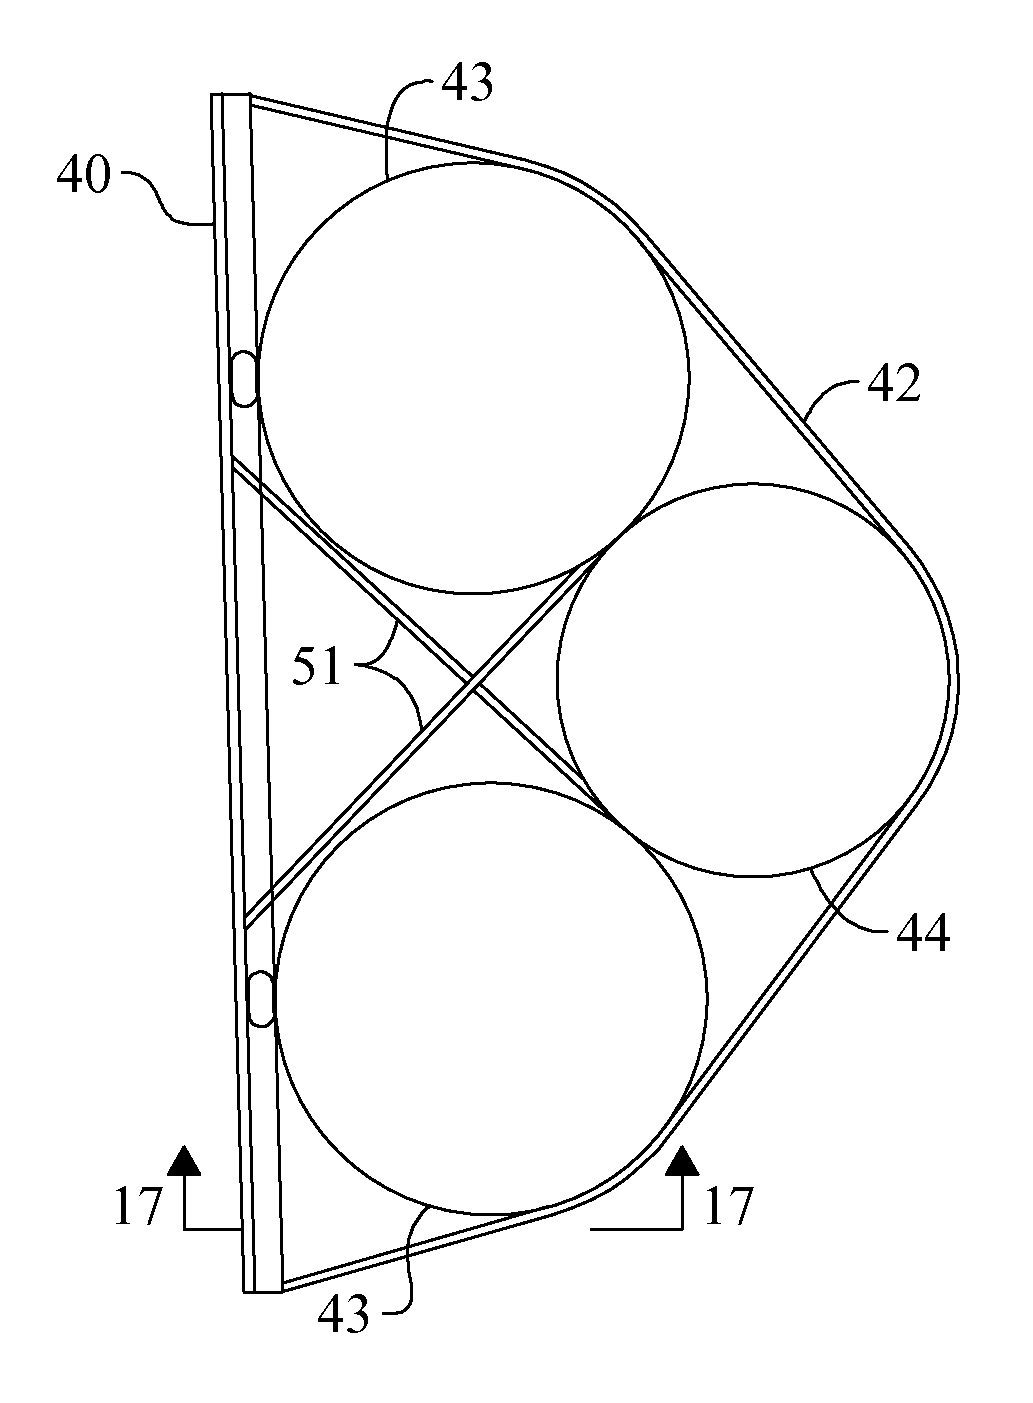 Inflatable shaping system reducing the aerodynamic drag upon the rear of a vehicle